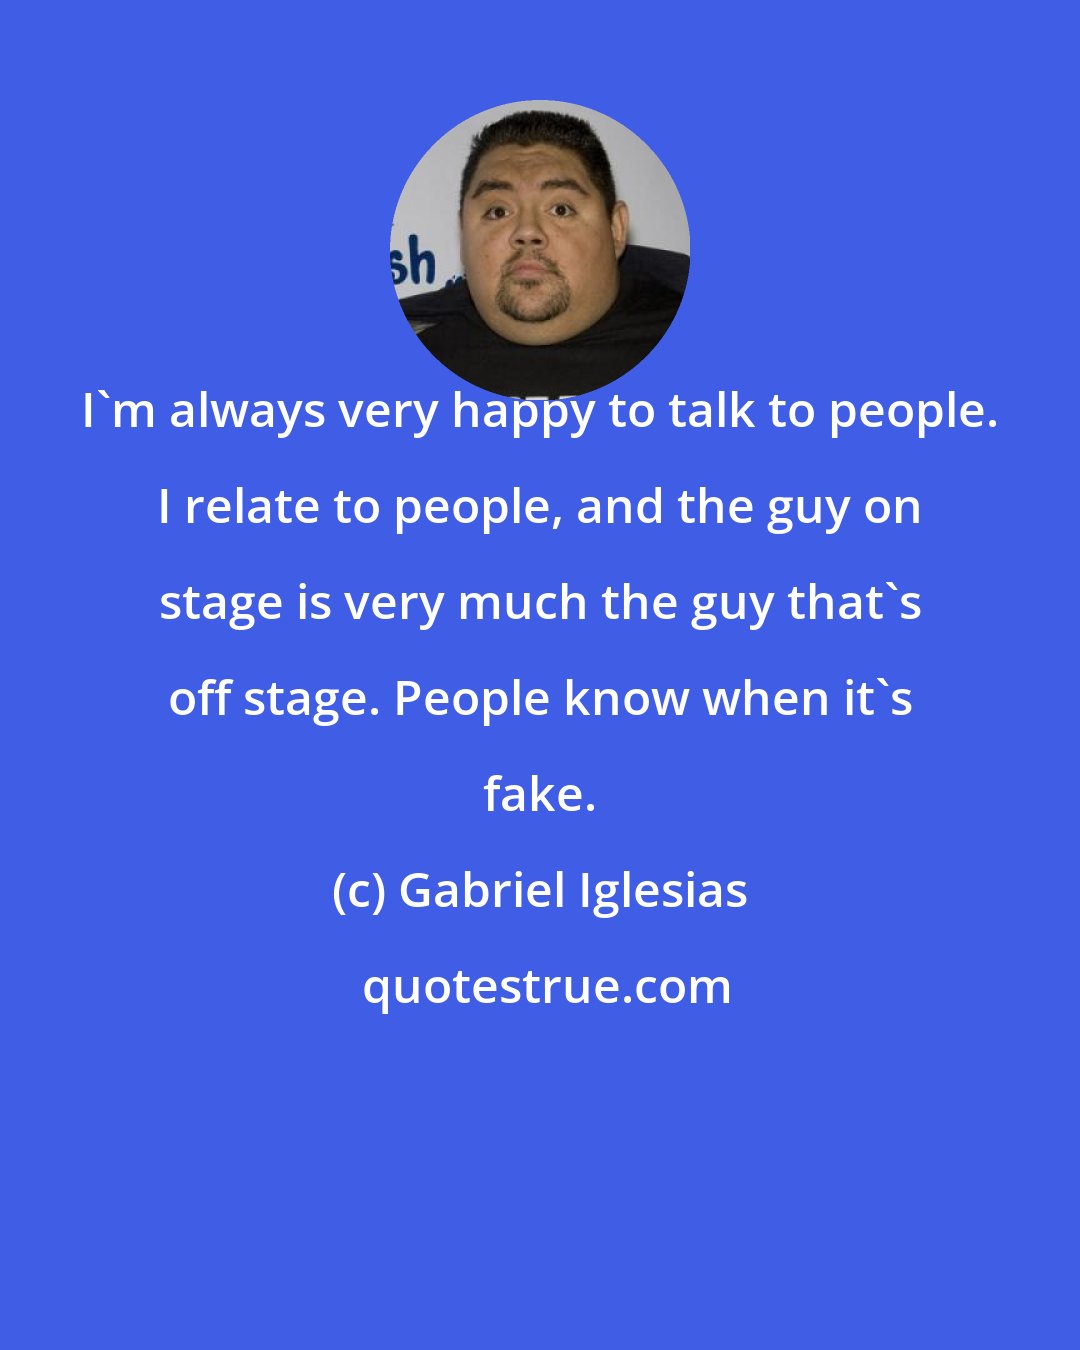 Gabriel Iglesias: I'm always very happy to talk to people. I relate to people, and the guy on stage is very much the guy that's off stage. People know when it's fake.